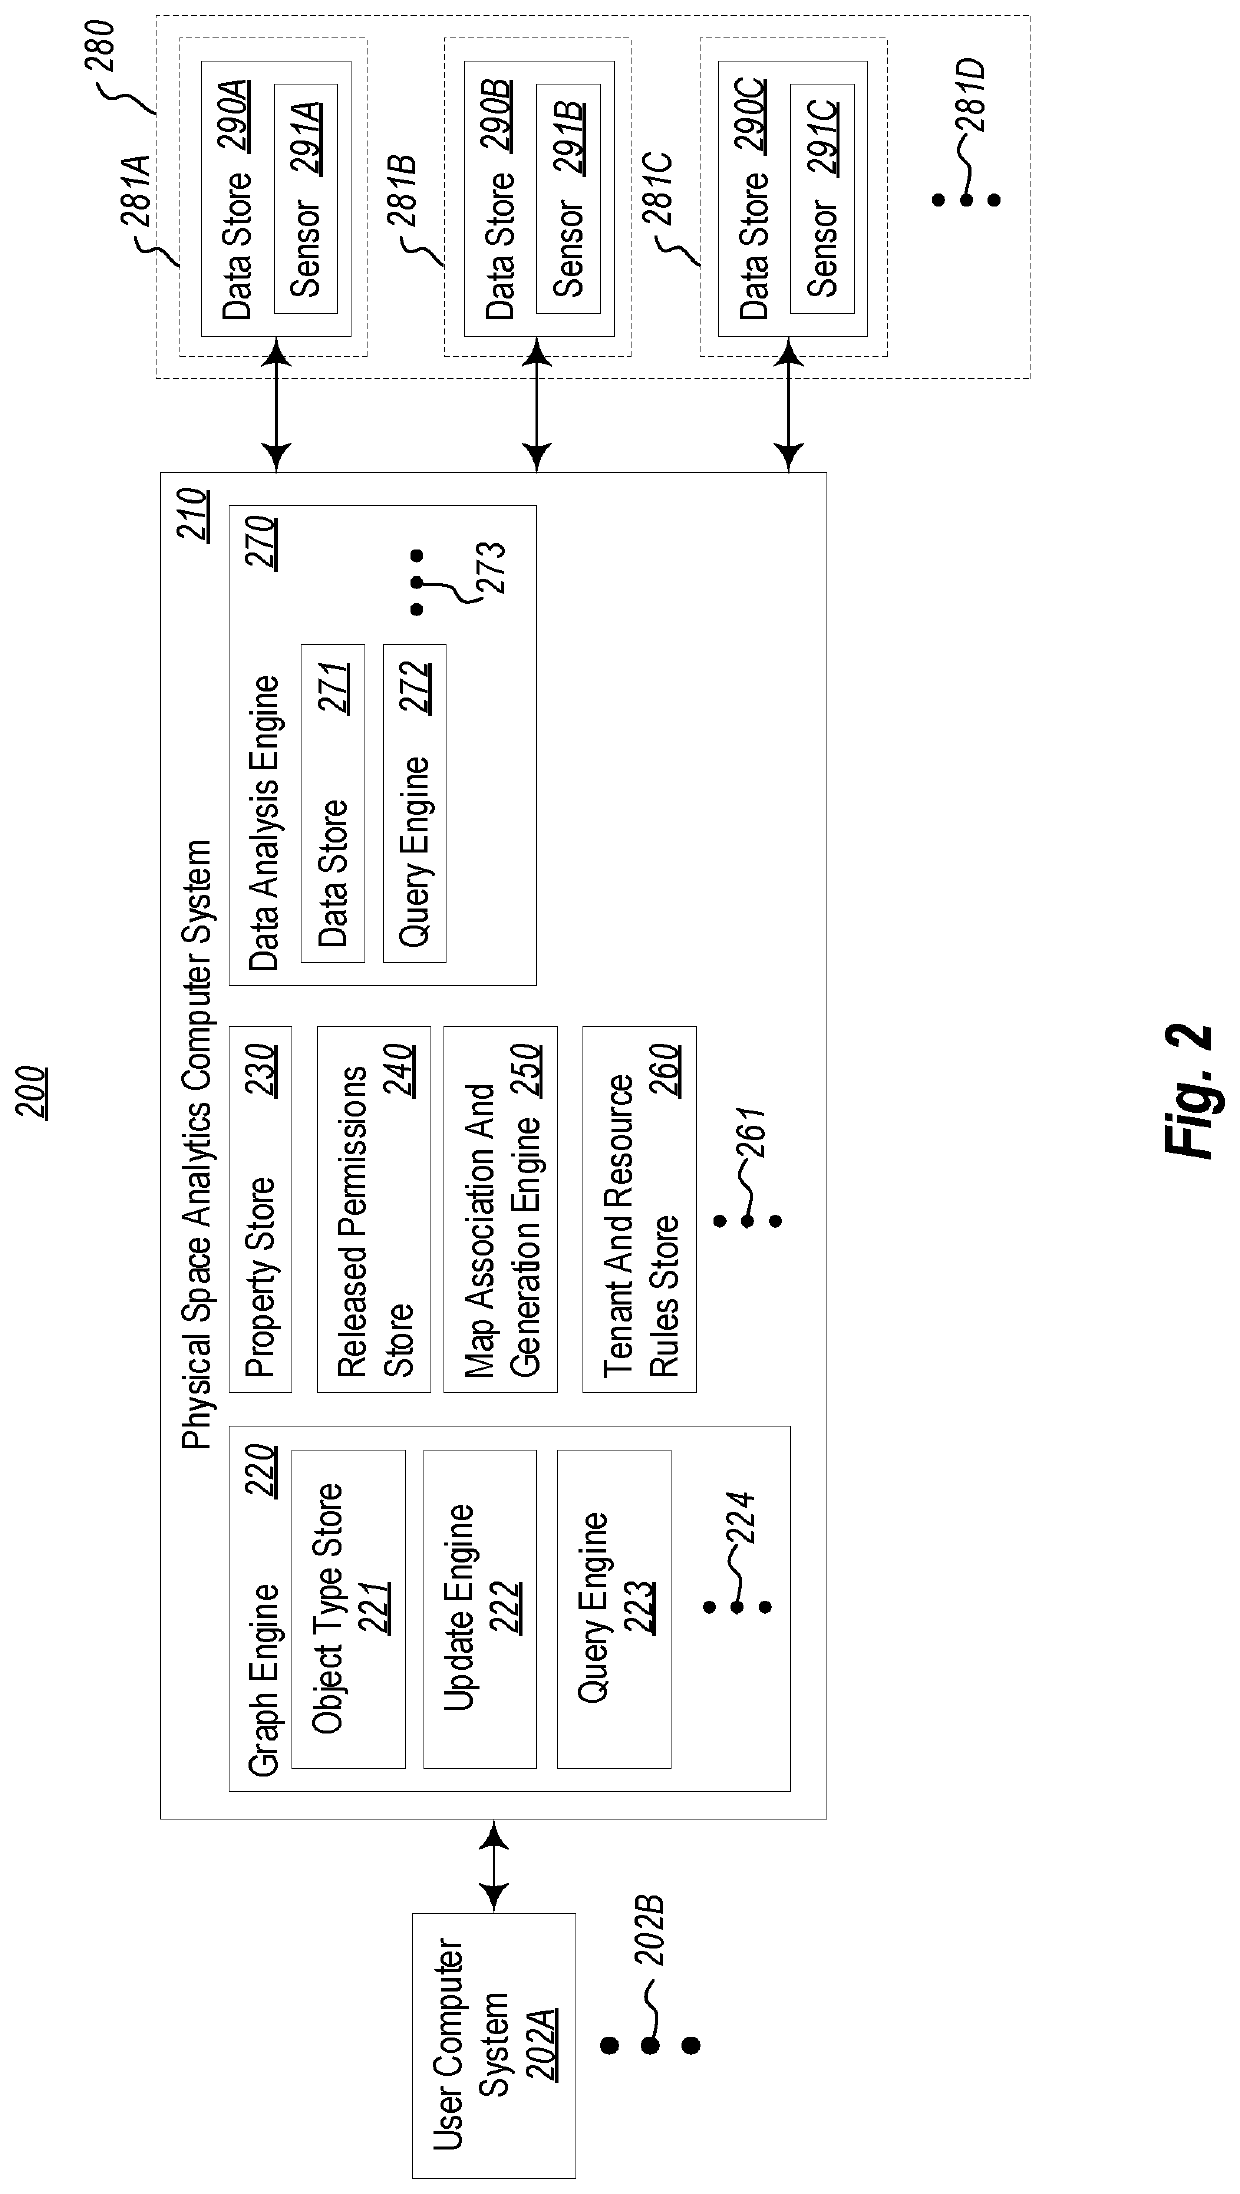 Device identification on a building automation control network